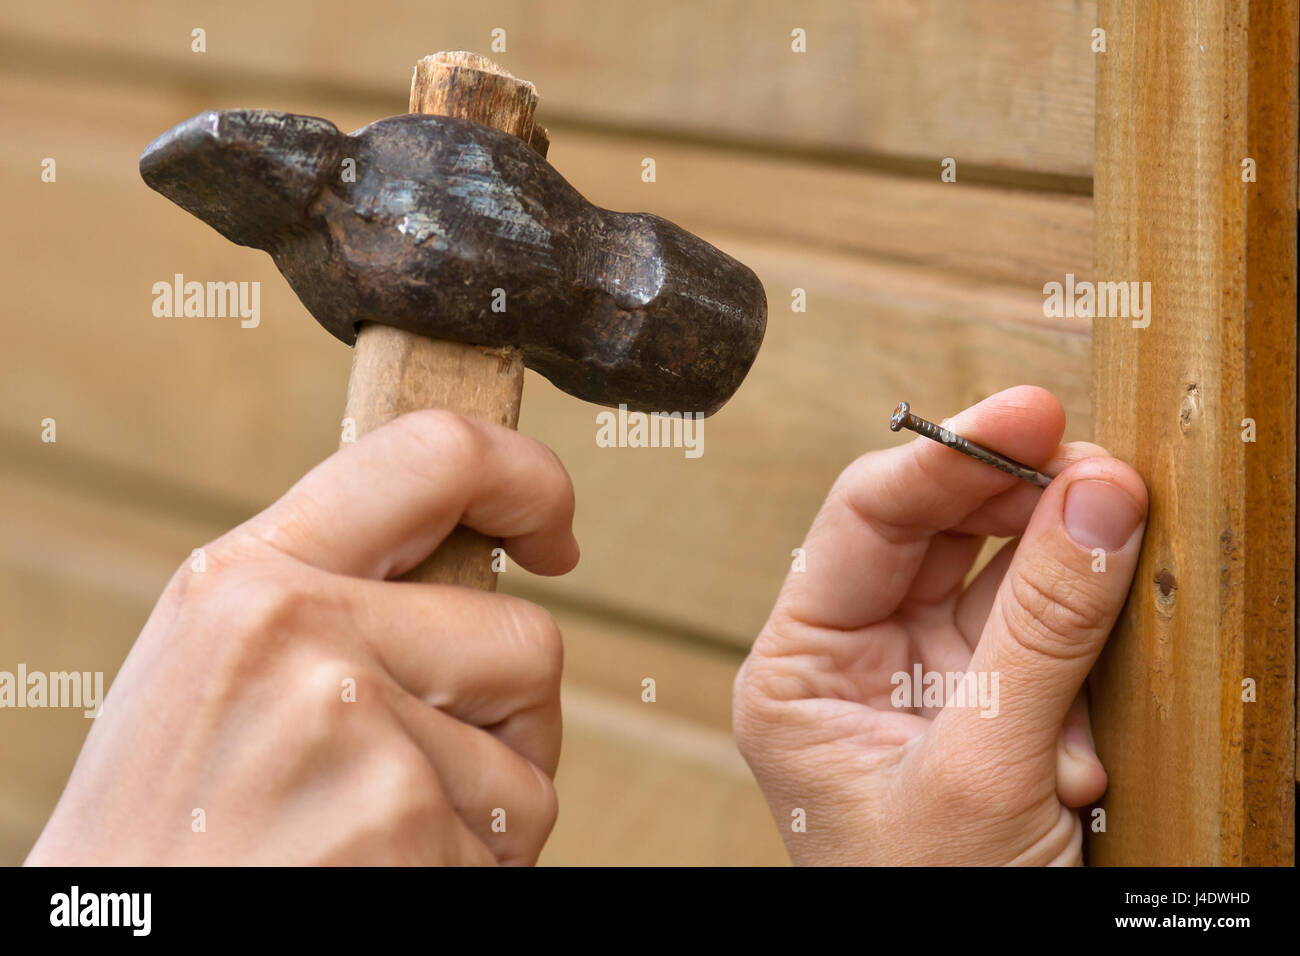 clouseup of hands hammering nail in wooden plank Stock Photo